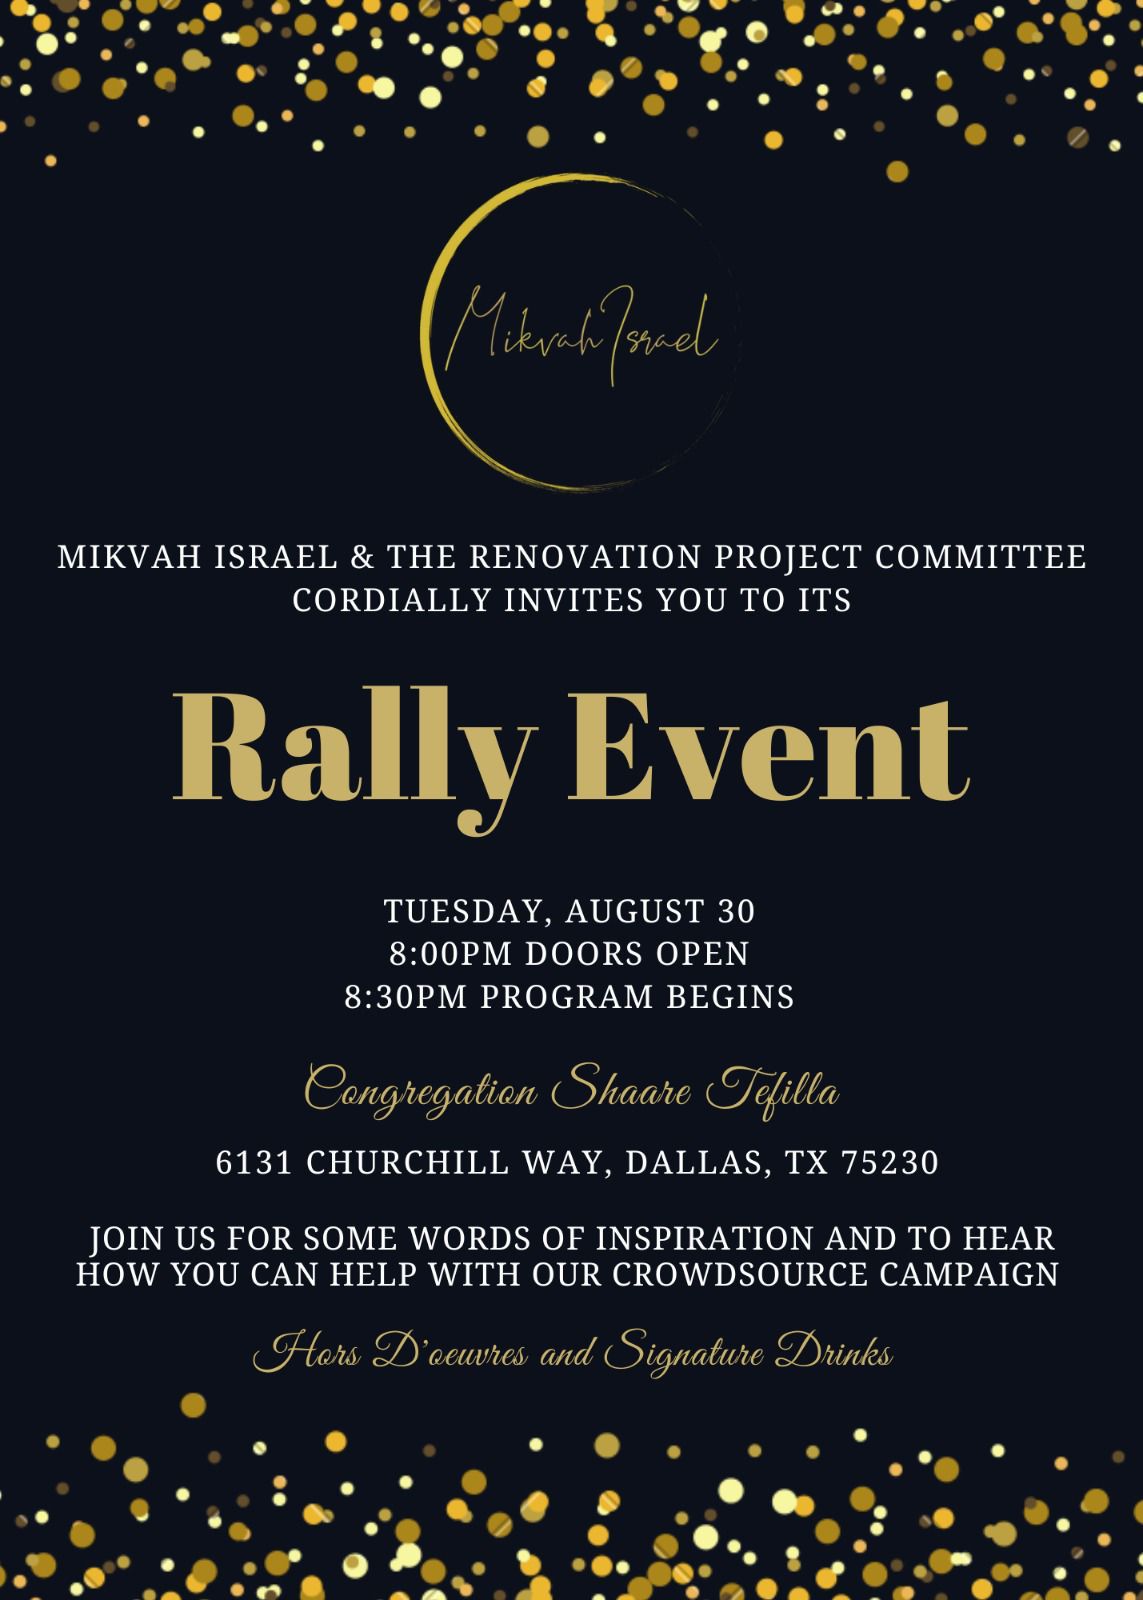 Mikvah Israel & the Renovation Project Committee Invite You to its Rally Event